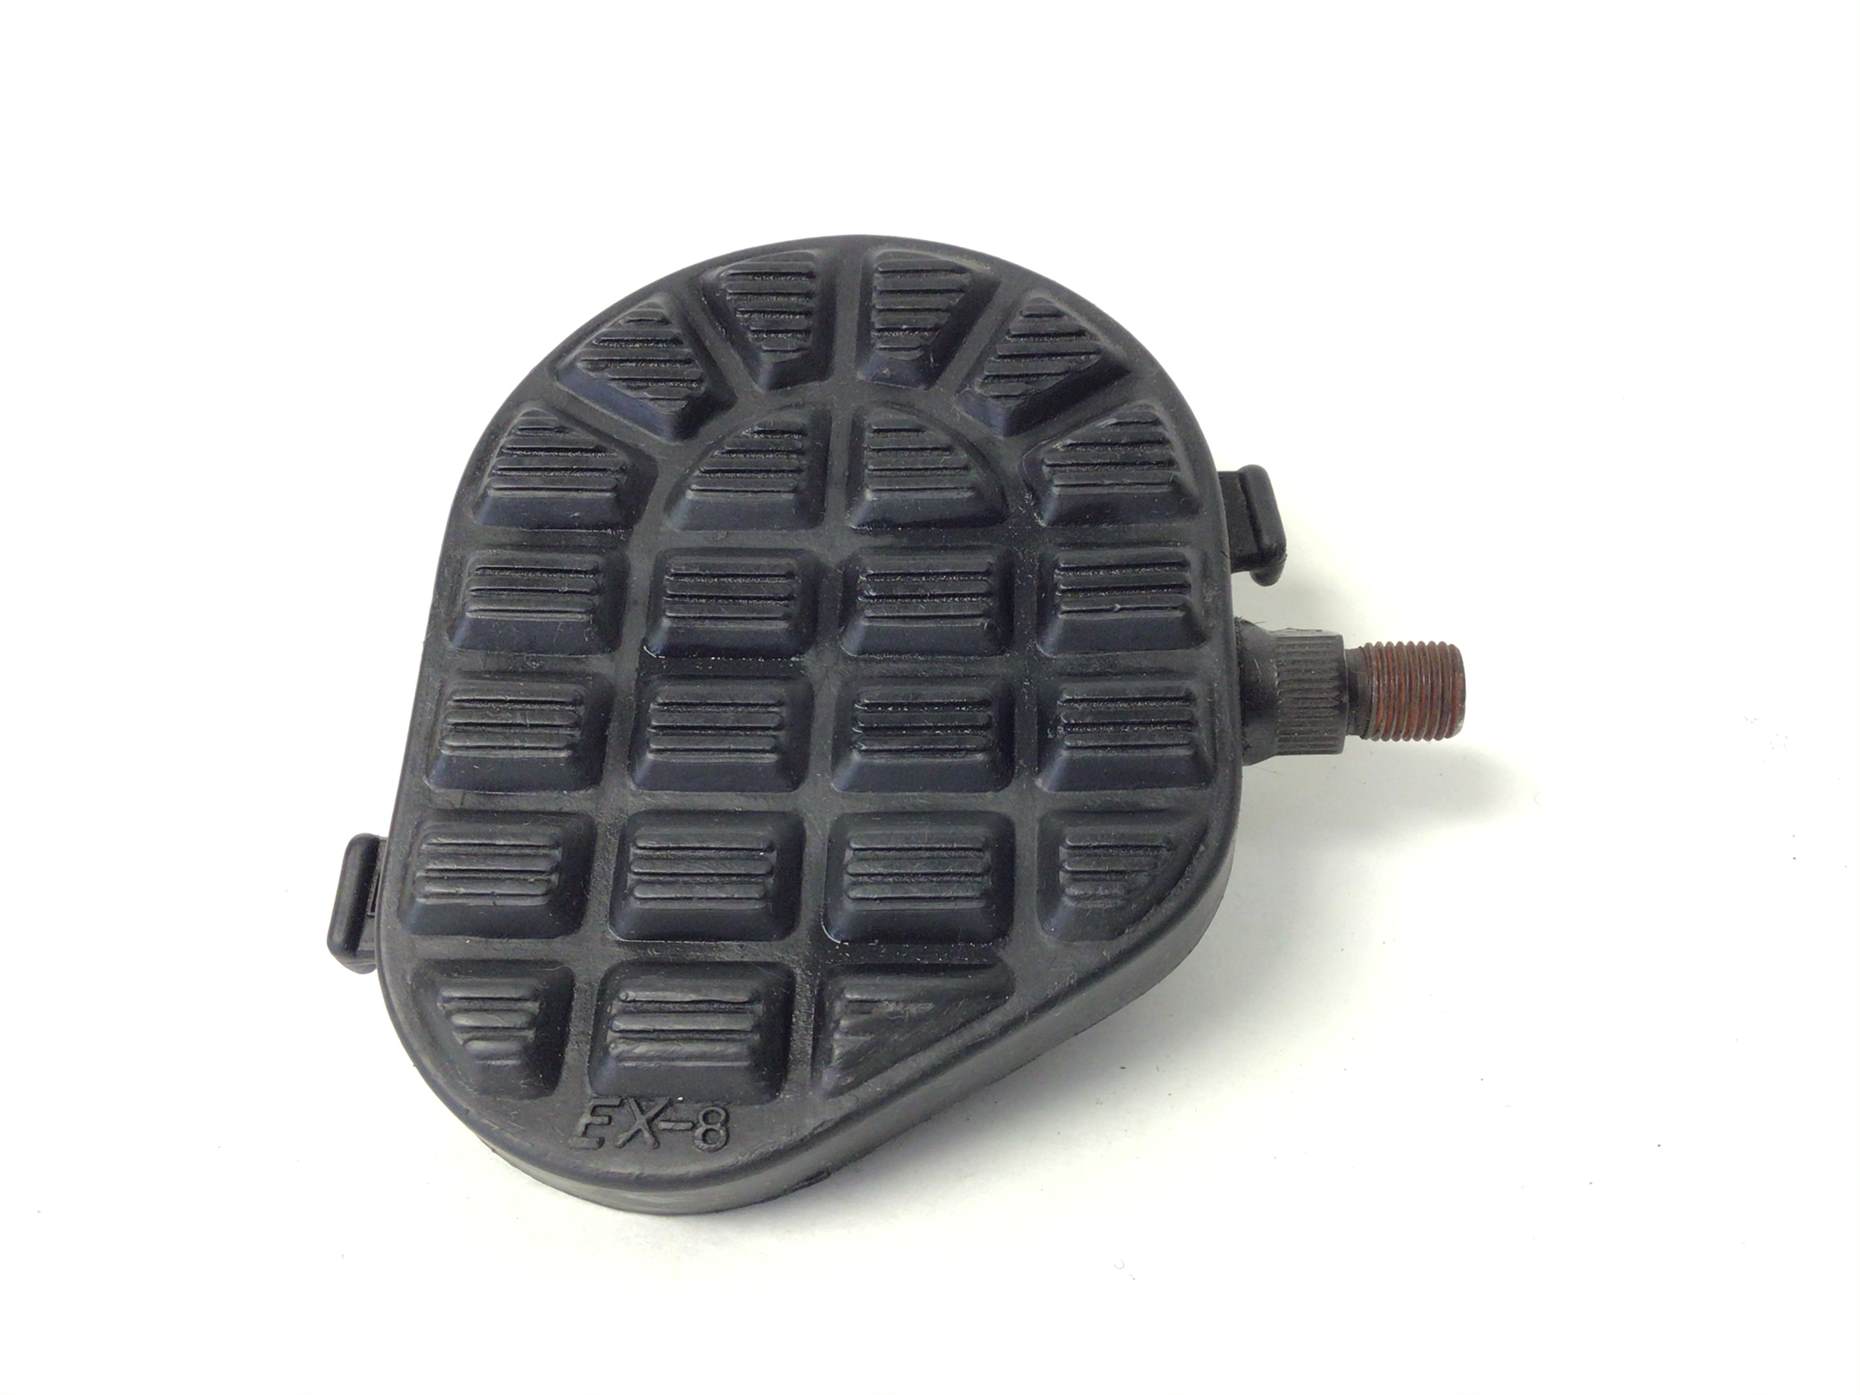 Half Inch Left Foot Pedal (Used)